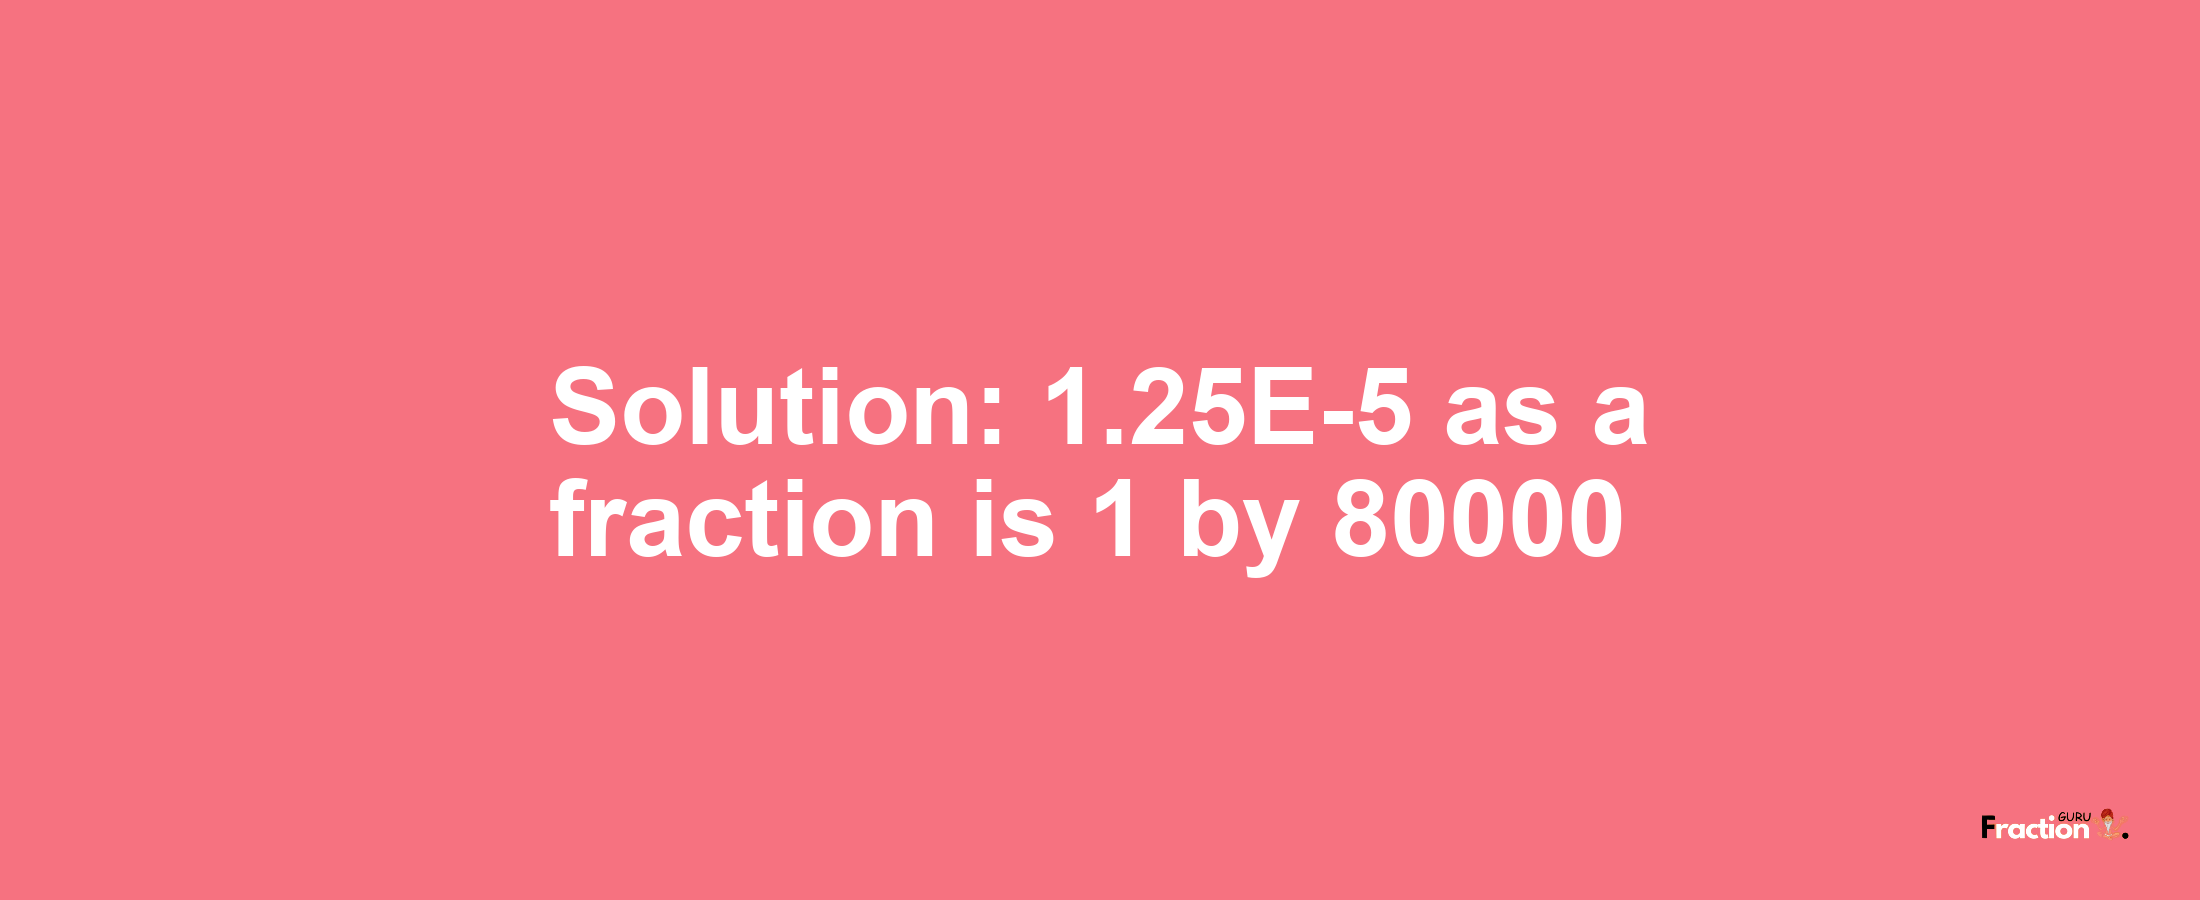 Solution:1.25E-5 as a fraction is 1/80000